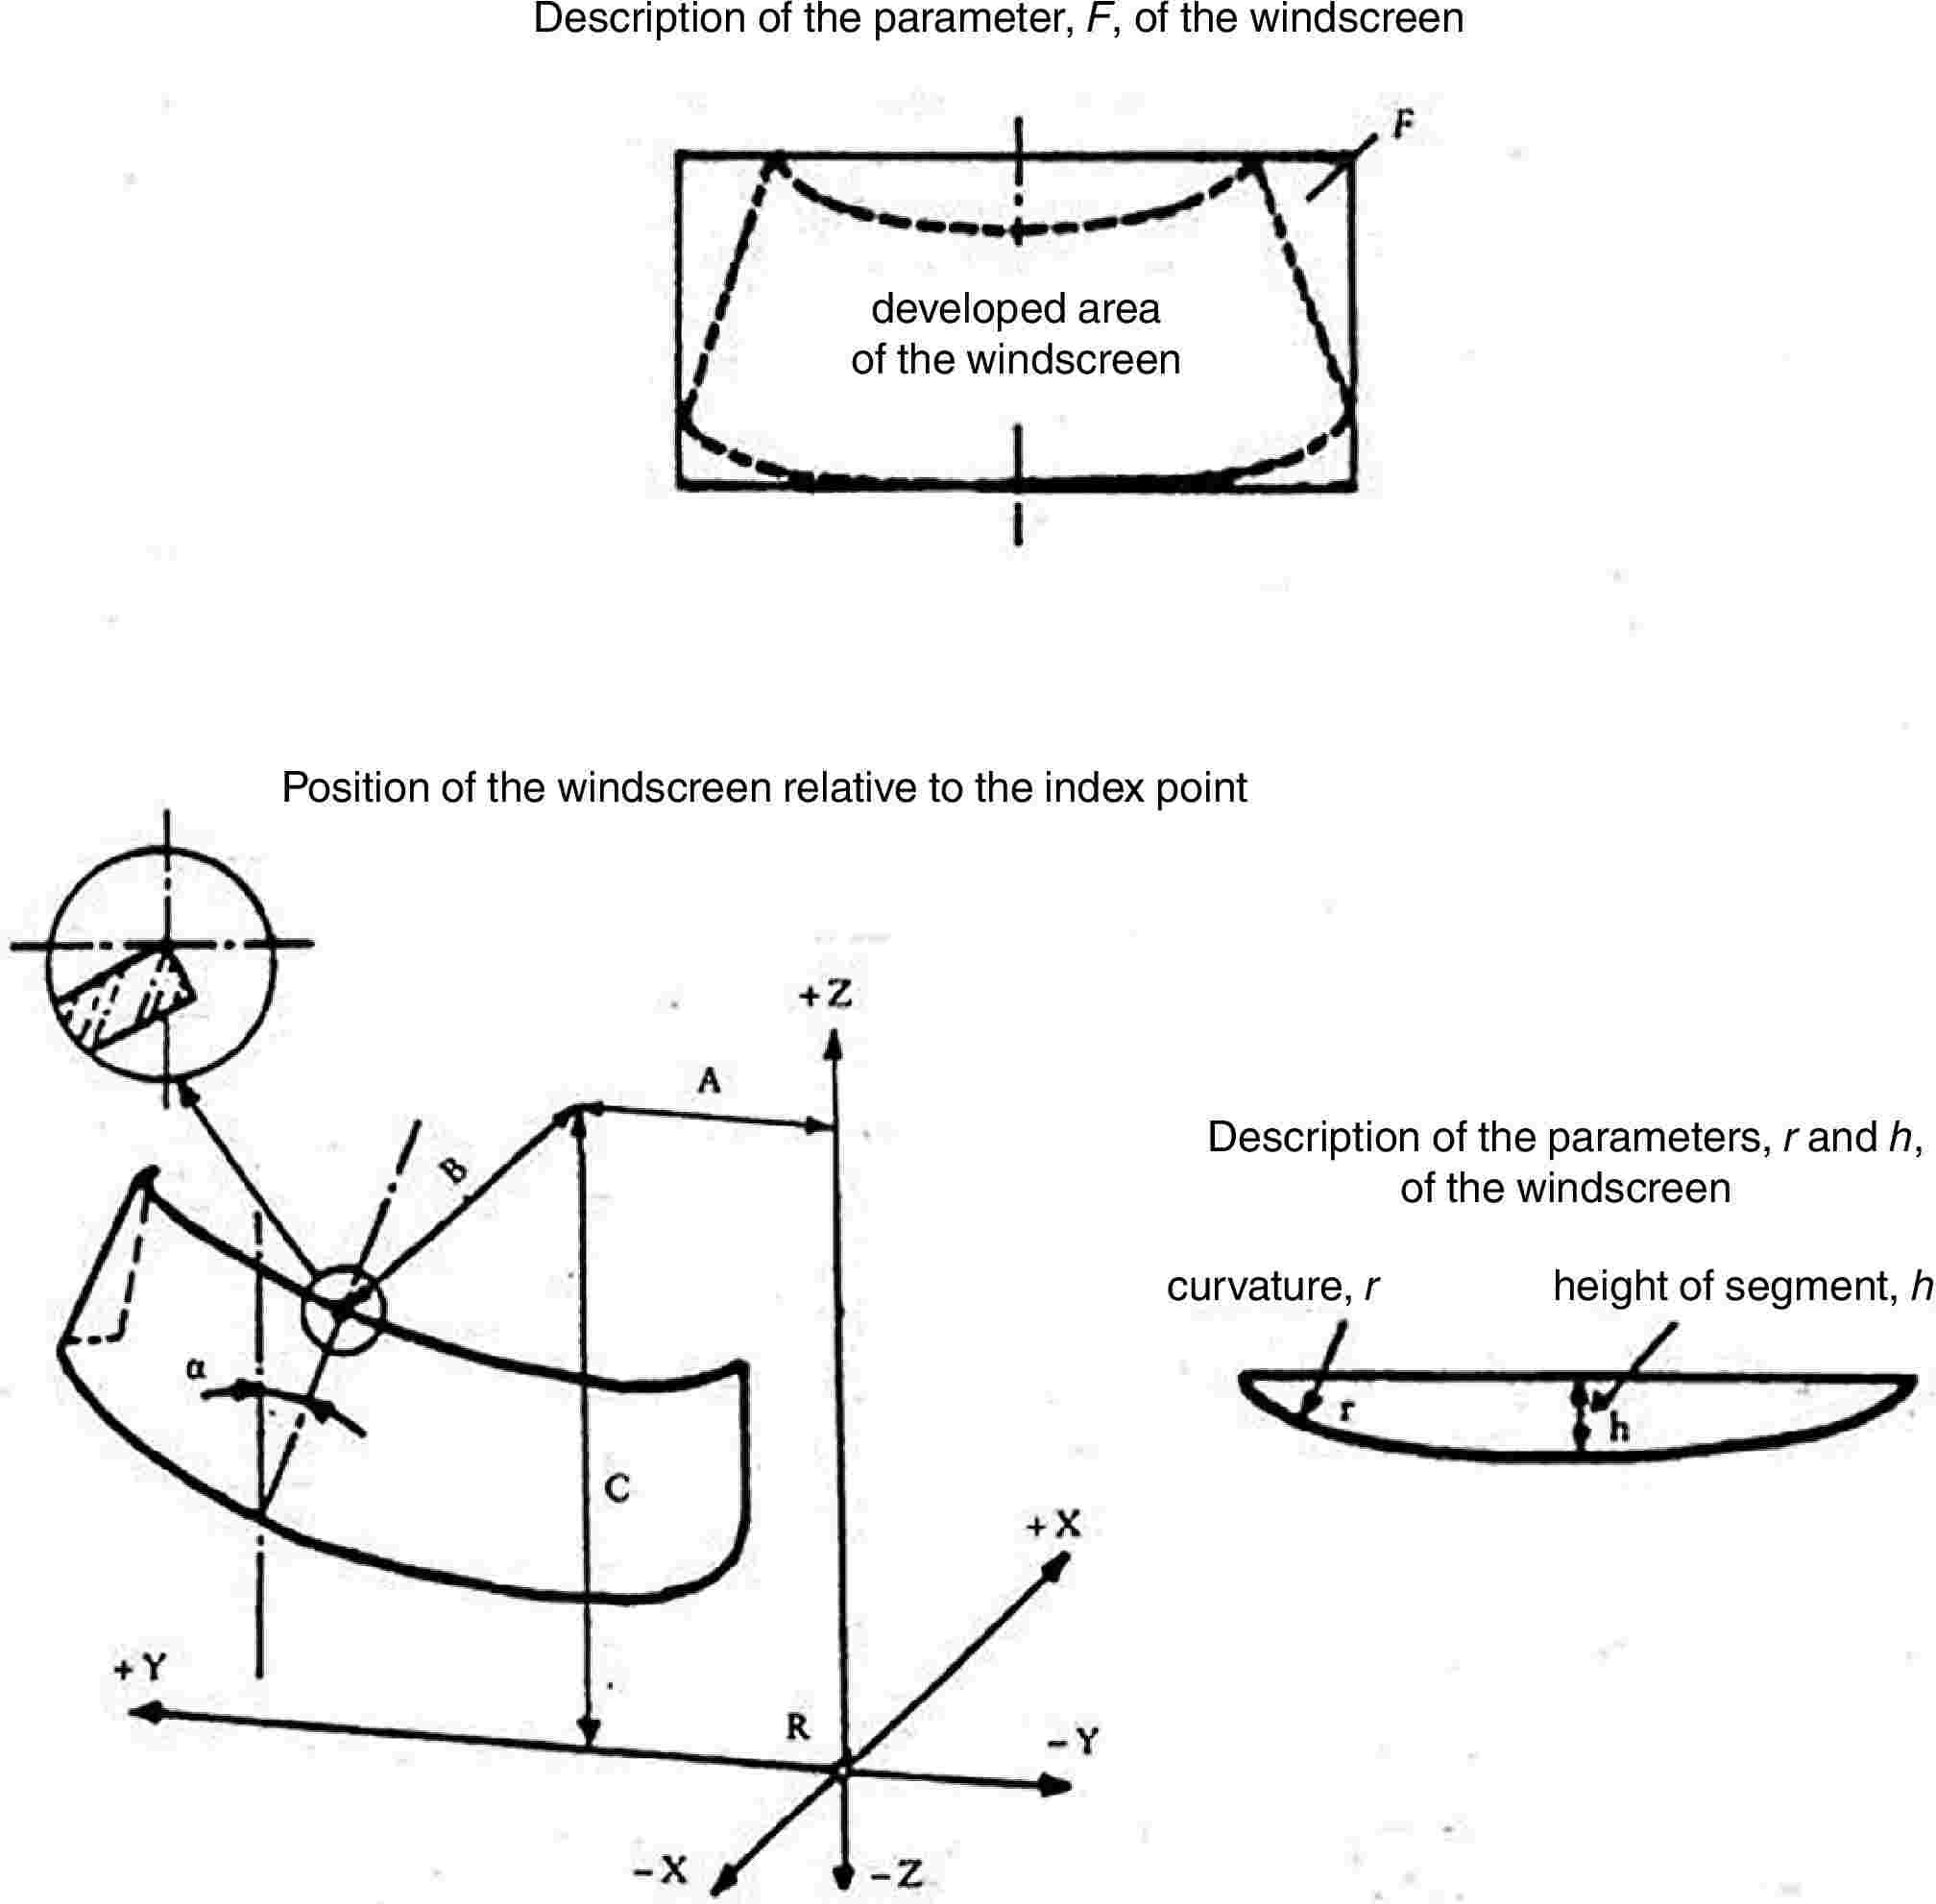 Description of the parameter, F, of the windscreendeveloped area of the windscreenPosition of the windscreen relative to the index pointDescription of the parameters, r and h, of the windscreencurvature, rheight of segment, h